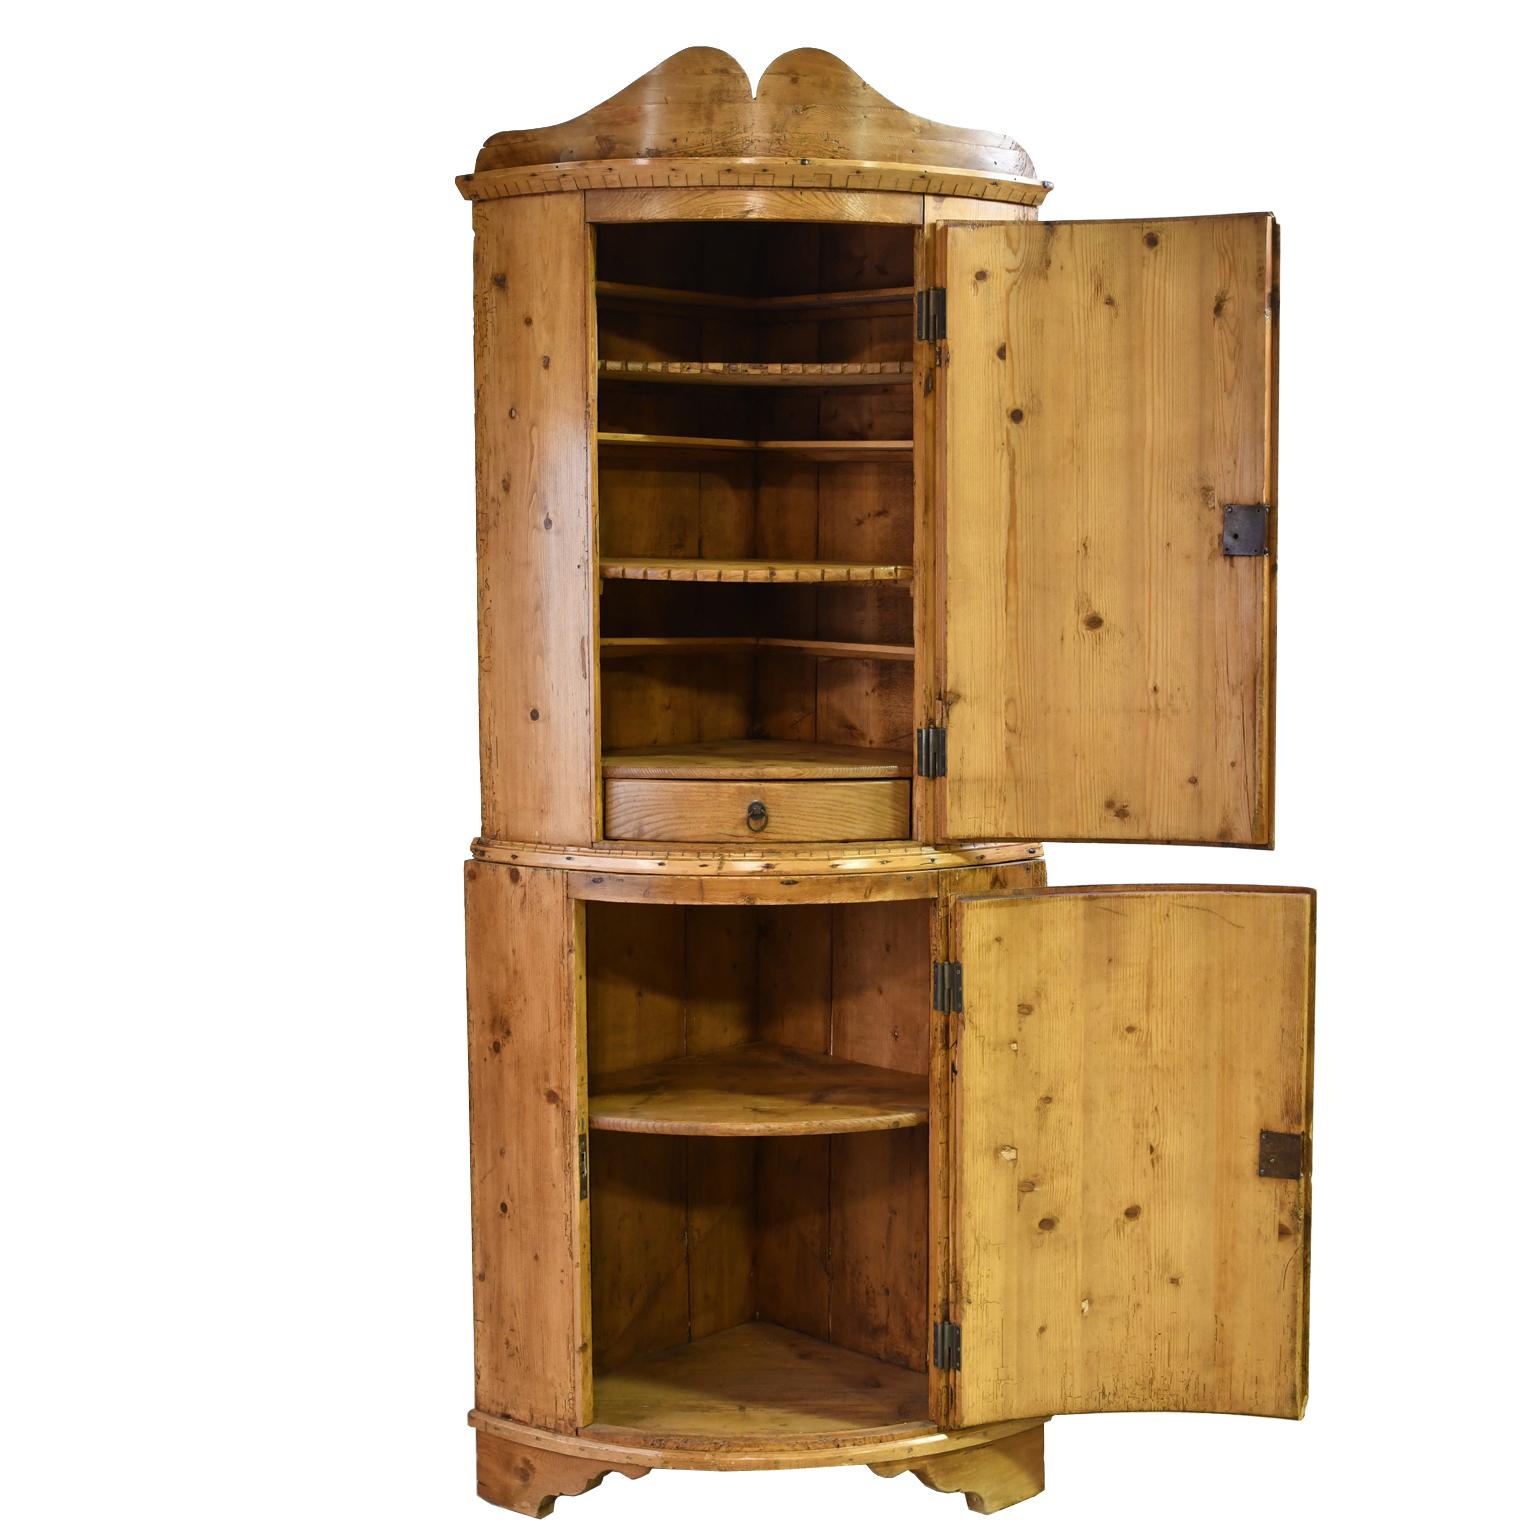 A charming Baroque corner cupboard with arched pediment top and two bowed doors with original steel hinges that offer two separate storage spaces that open to shelving with one interior drawer. Base rests on bracket feet with scalloped edge. Comes